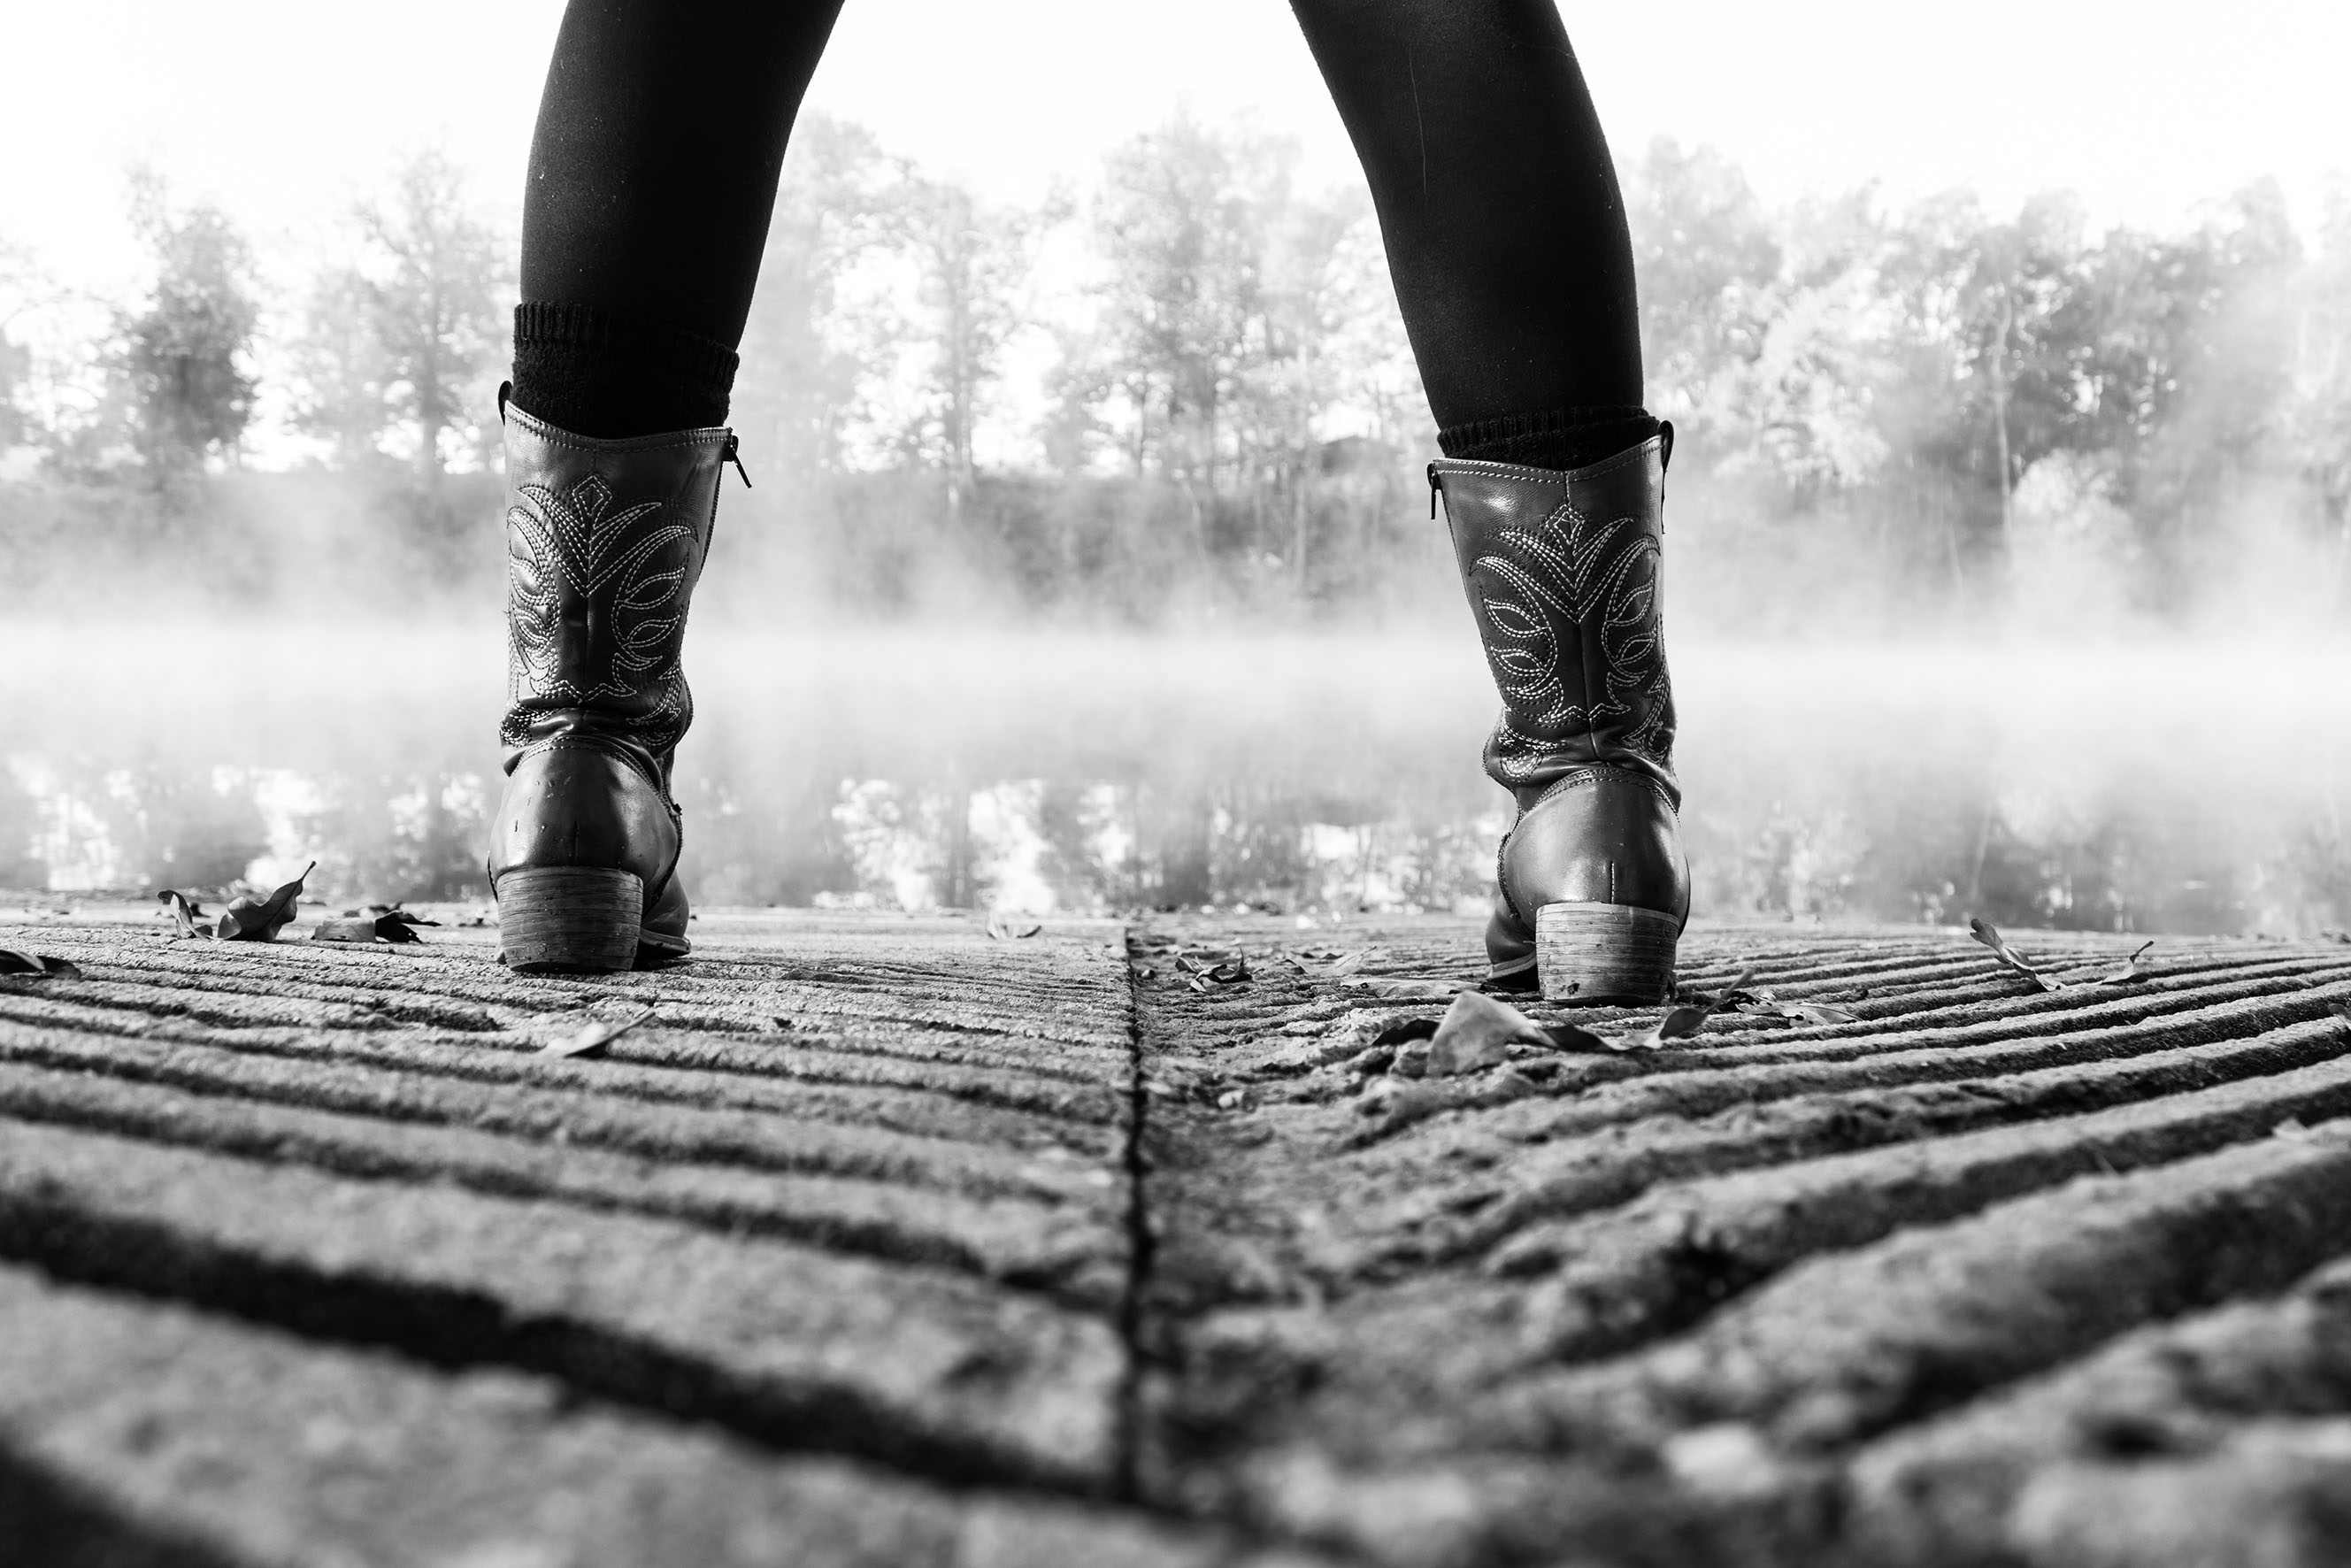 The black and white photo shows the lower legs of a woman in black pants. She wears cowboy boots and stands on an uneven earth surface.